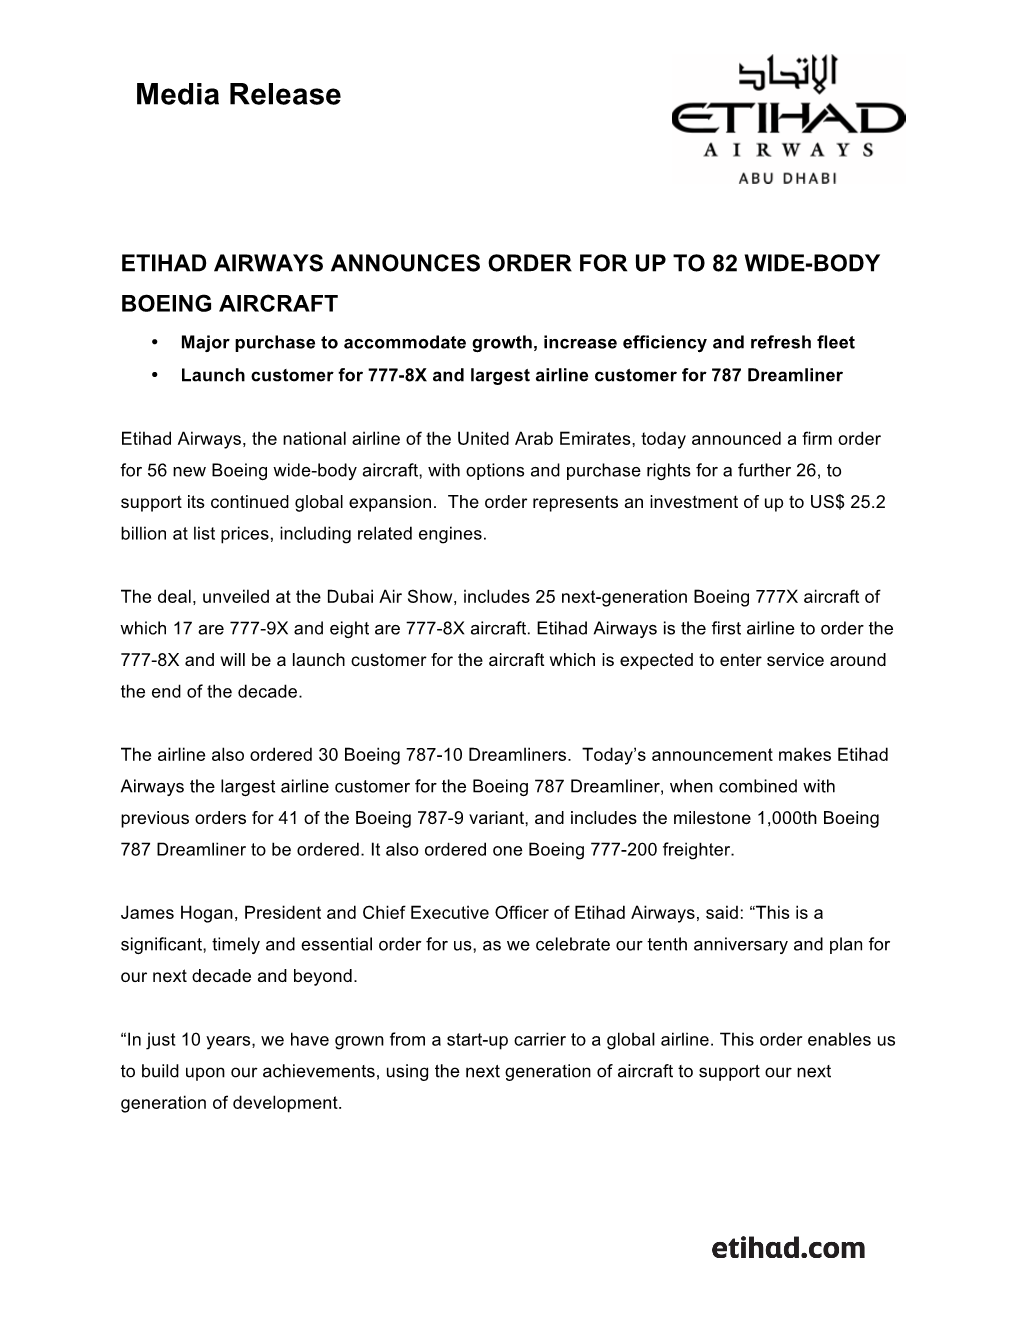 Etihad Airways Announces Order for up to 82 Wide-Body Boeing Aircraft